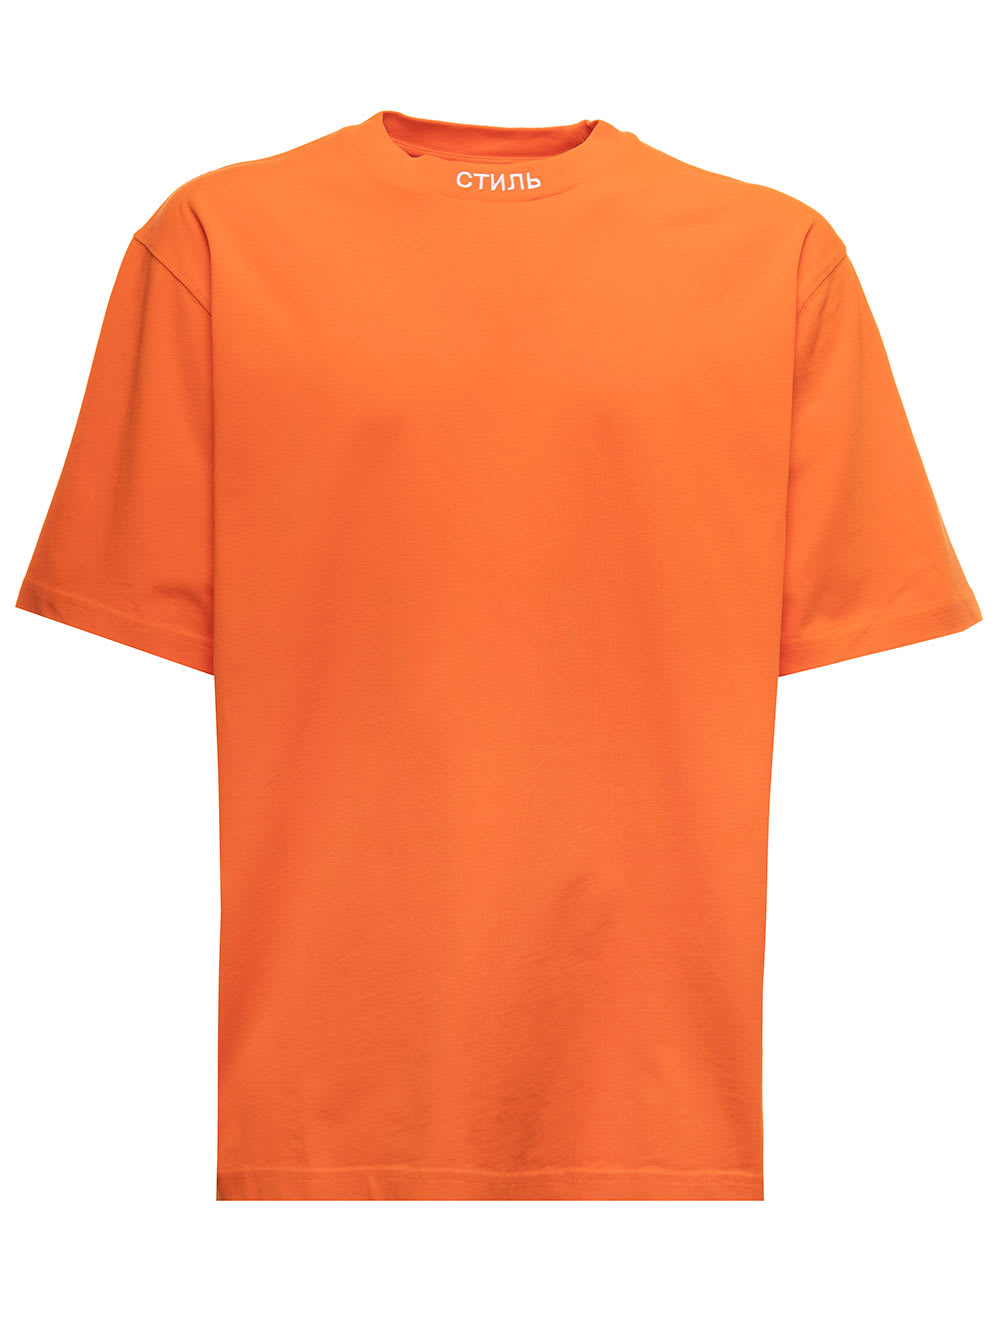 Ctnmb Orange T-shirt In Organic Cotton With Embroidery And Patch Heron Preston Man